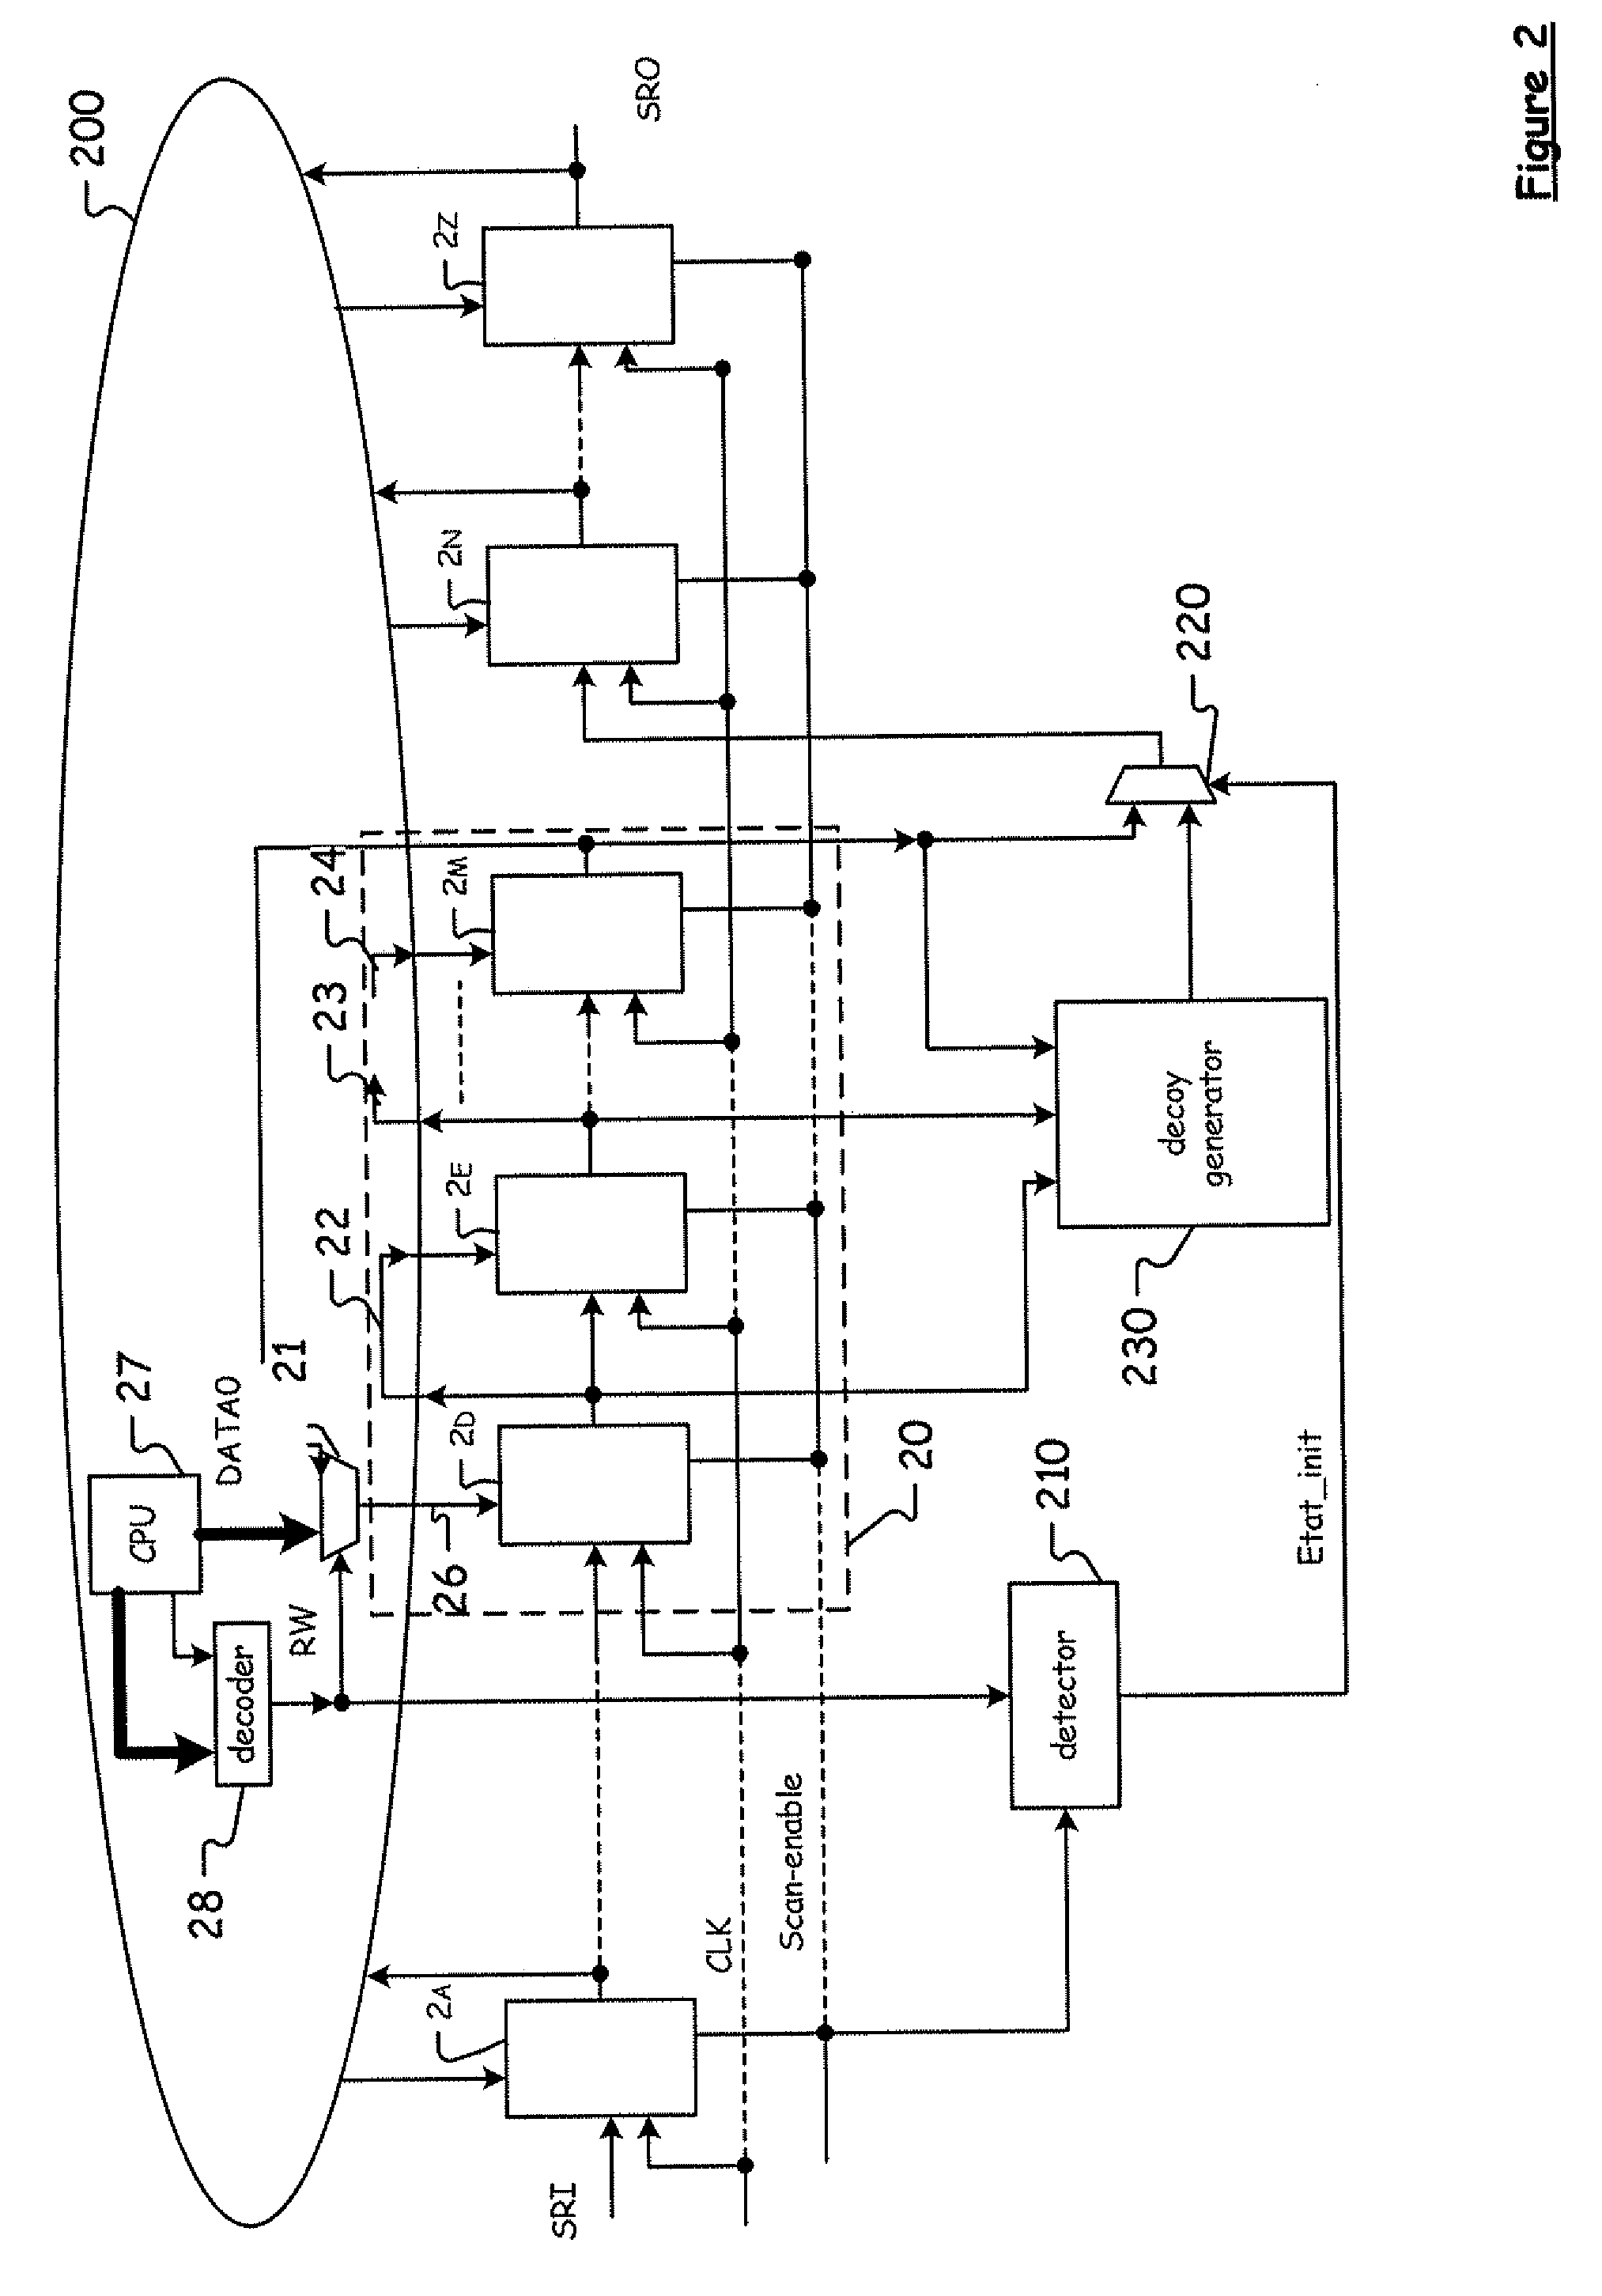 Electronic circuit comprising a test mode secured by insertion of decoy data in the test chain, associated method